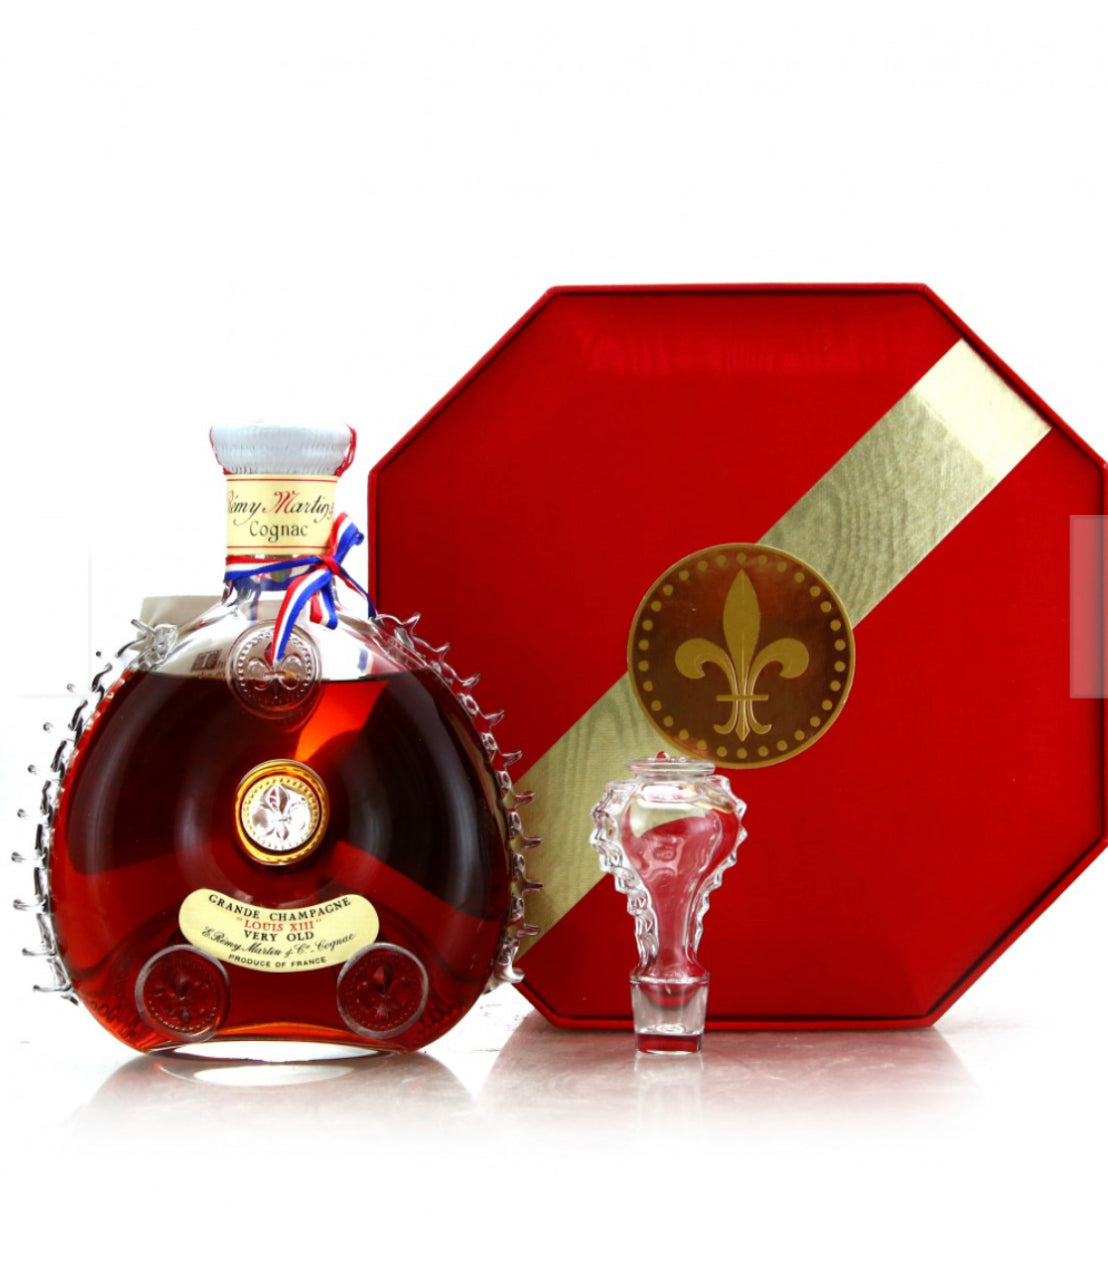 Remy Martin Louis XIII Cognac - Buy Online at